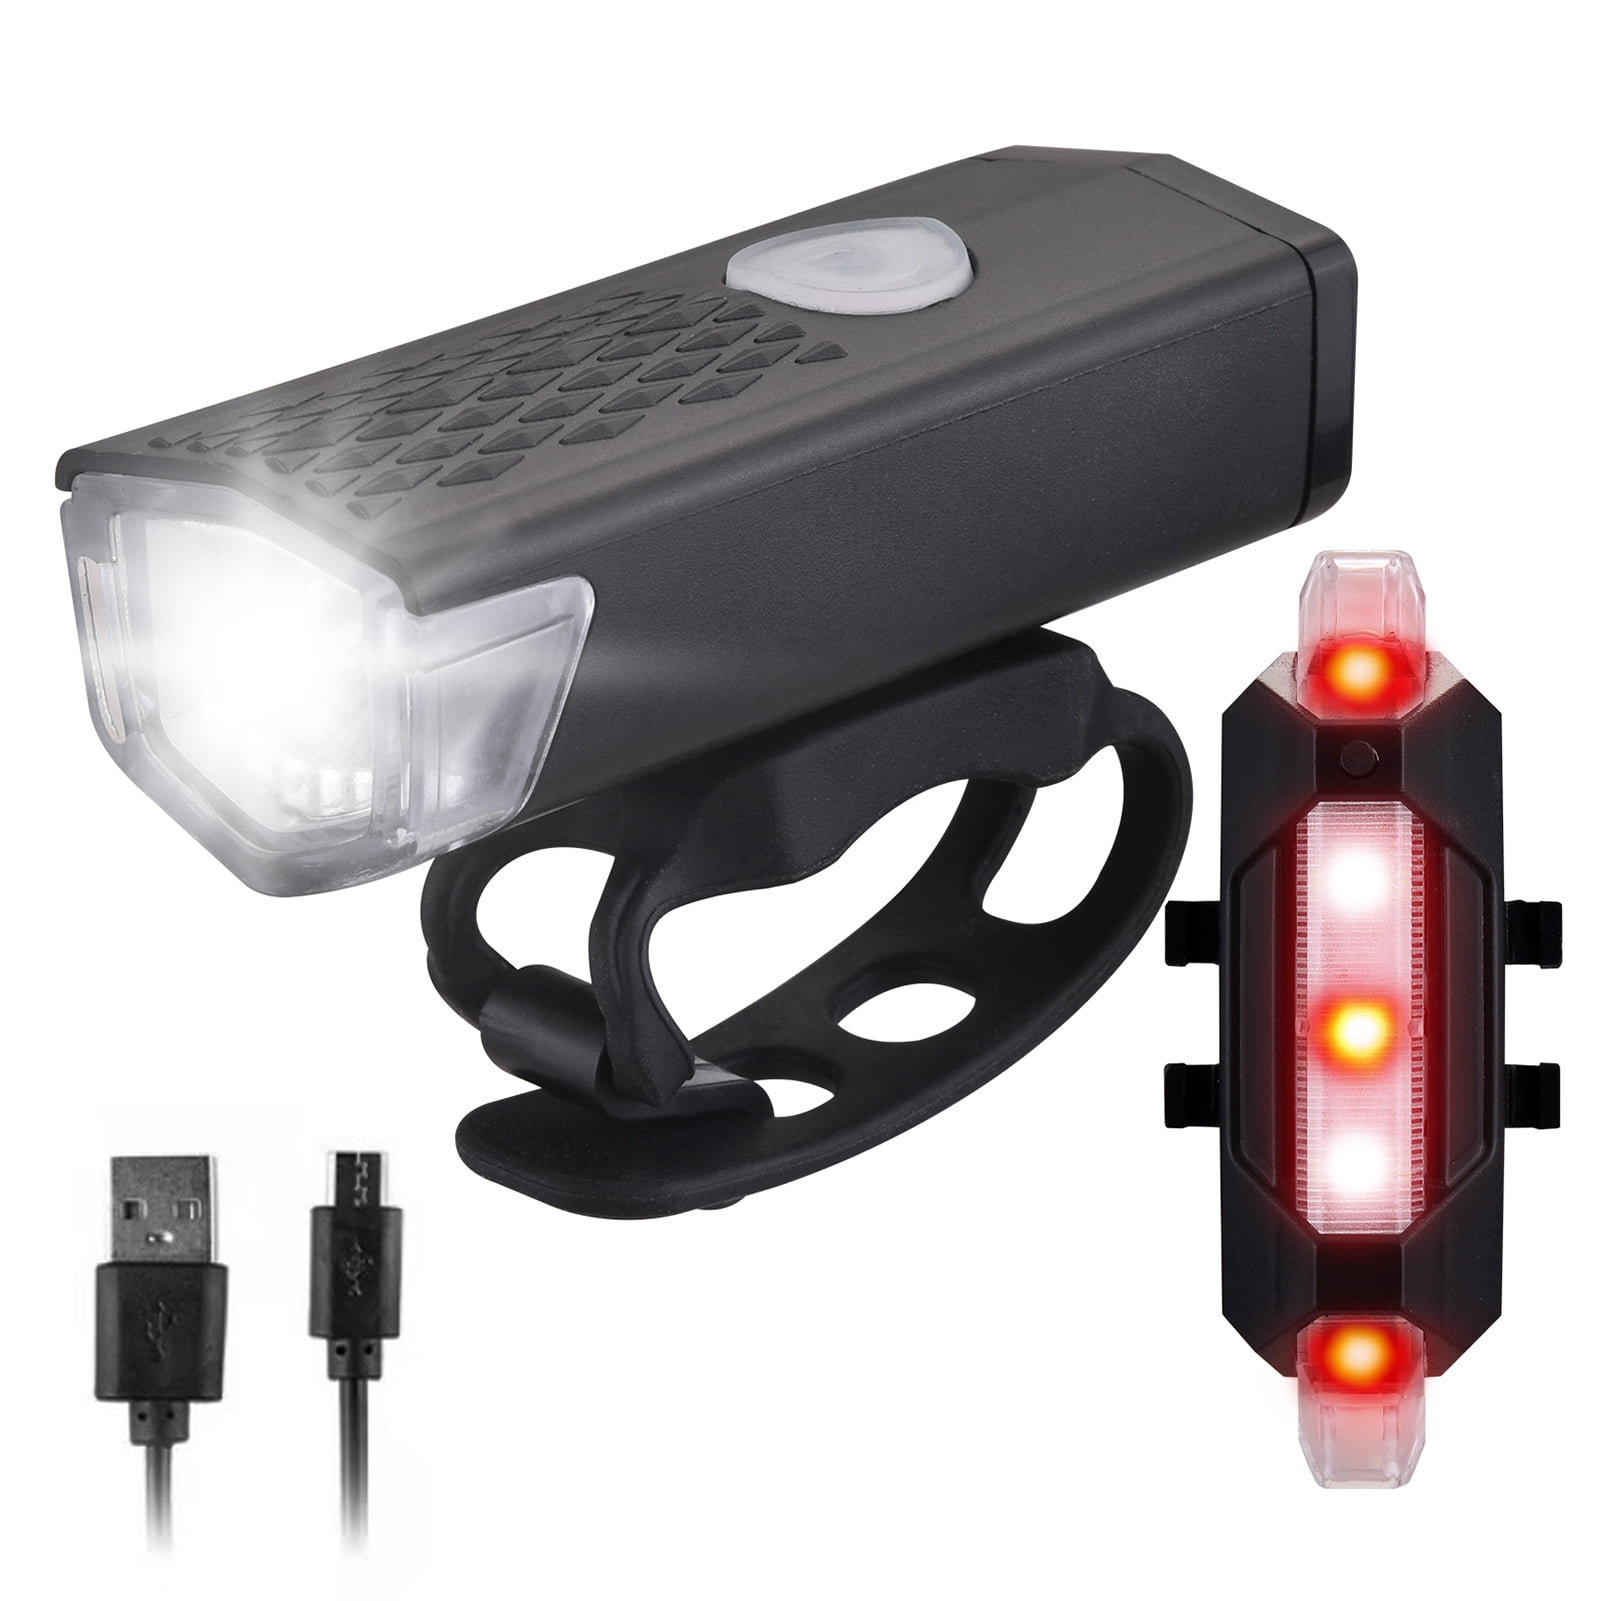 Details about   Rechargeable Bicycle Super Bright Bike Lights Set Front Rear Lamp Waterproof